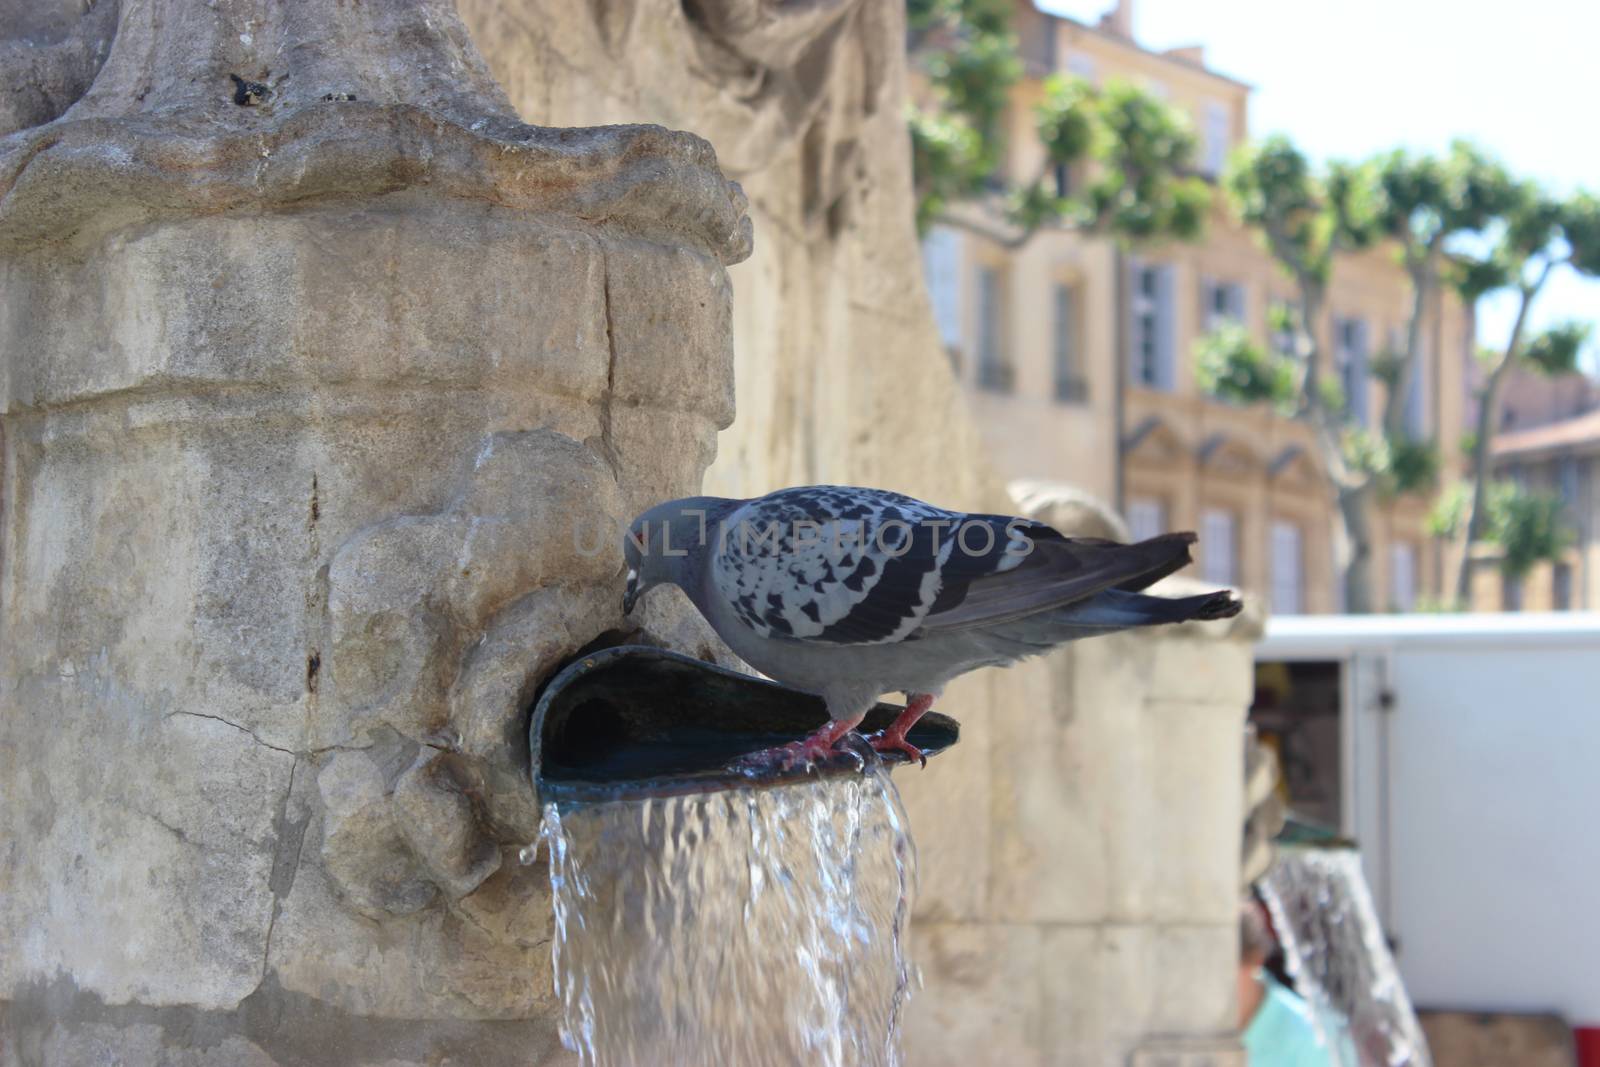 A close up of a pigeon standing on a water fountain in Aix-En-Provence, France